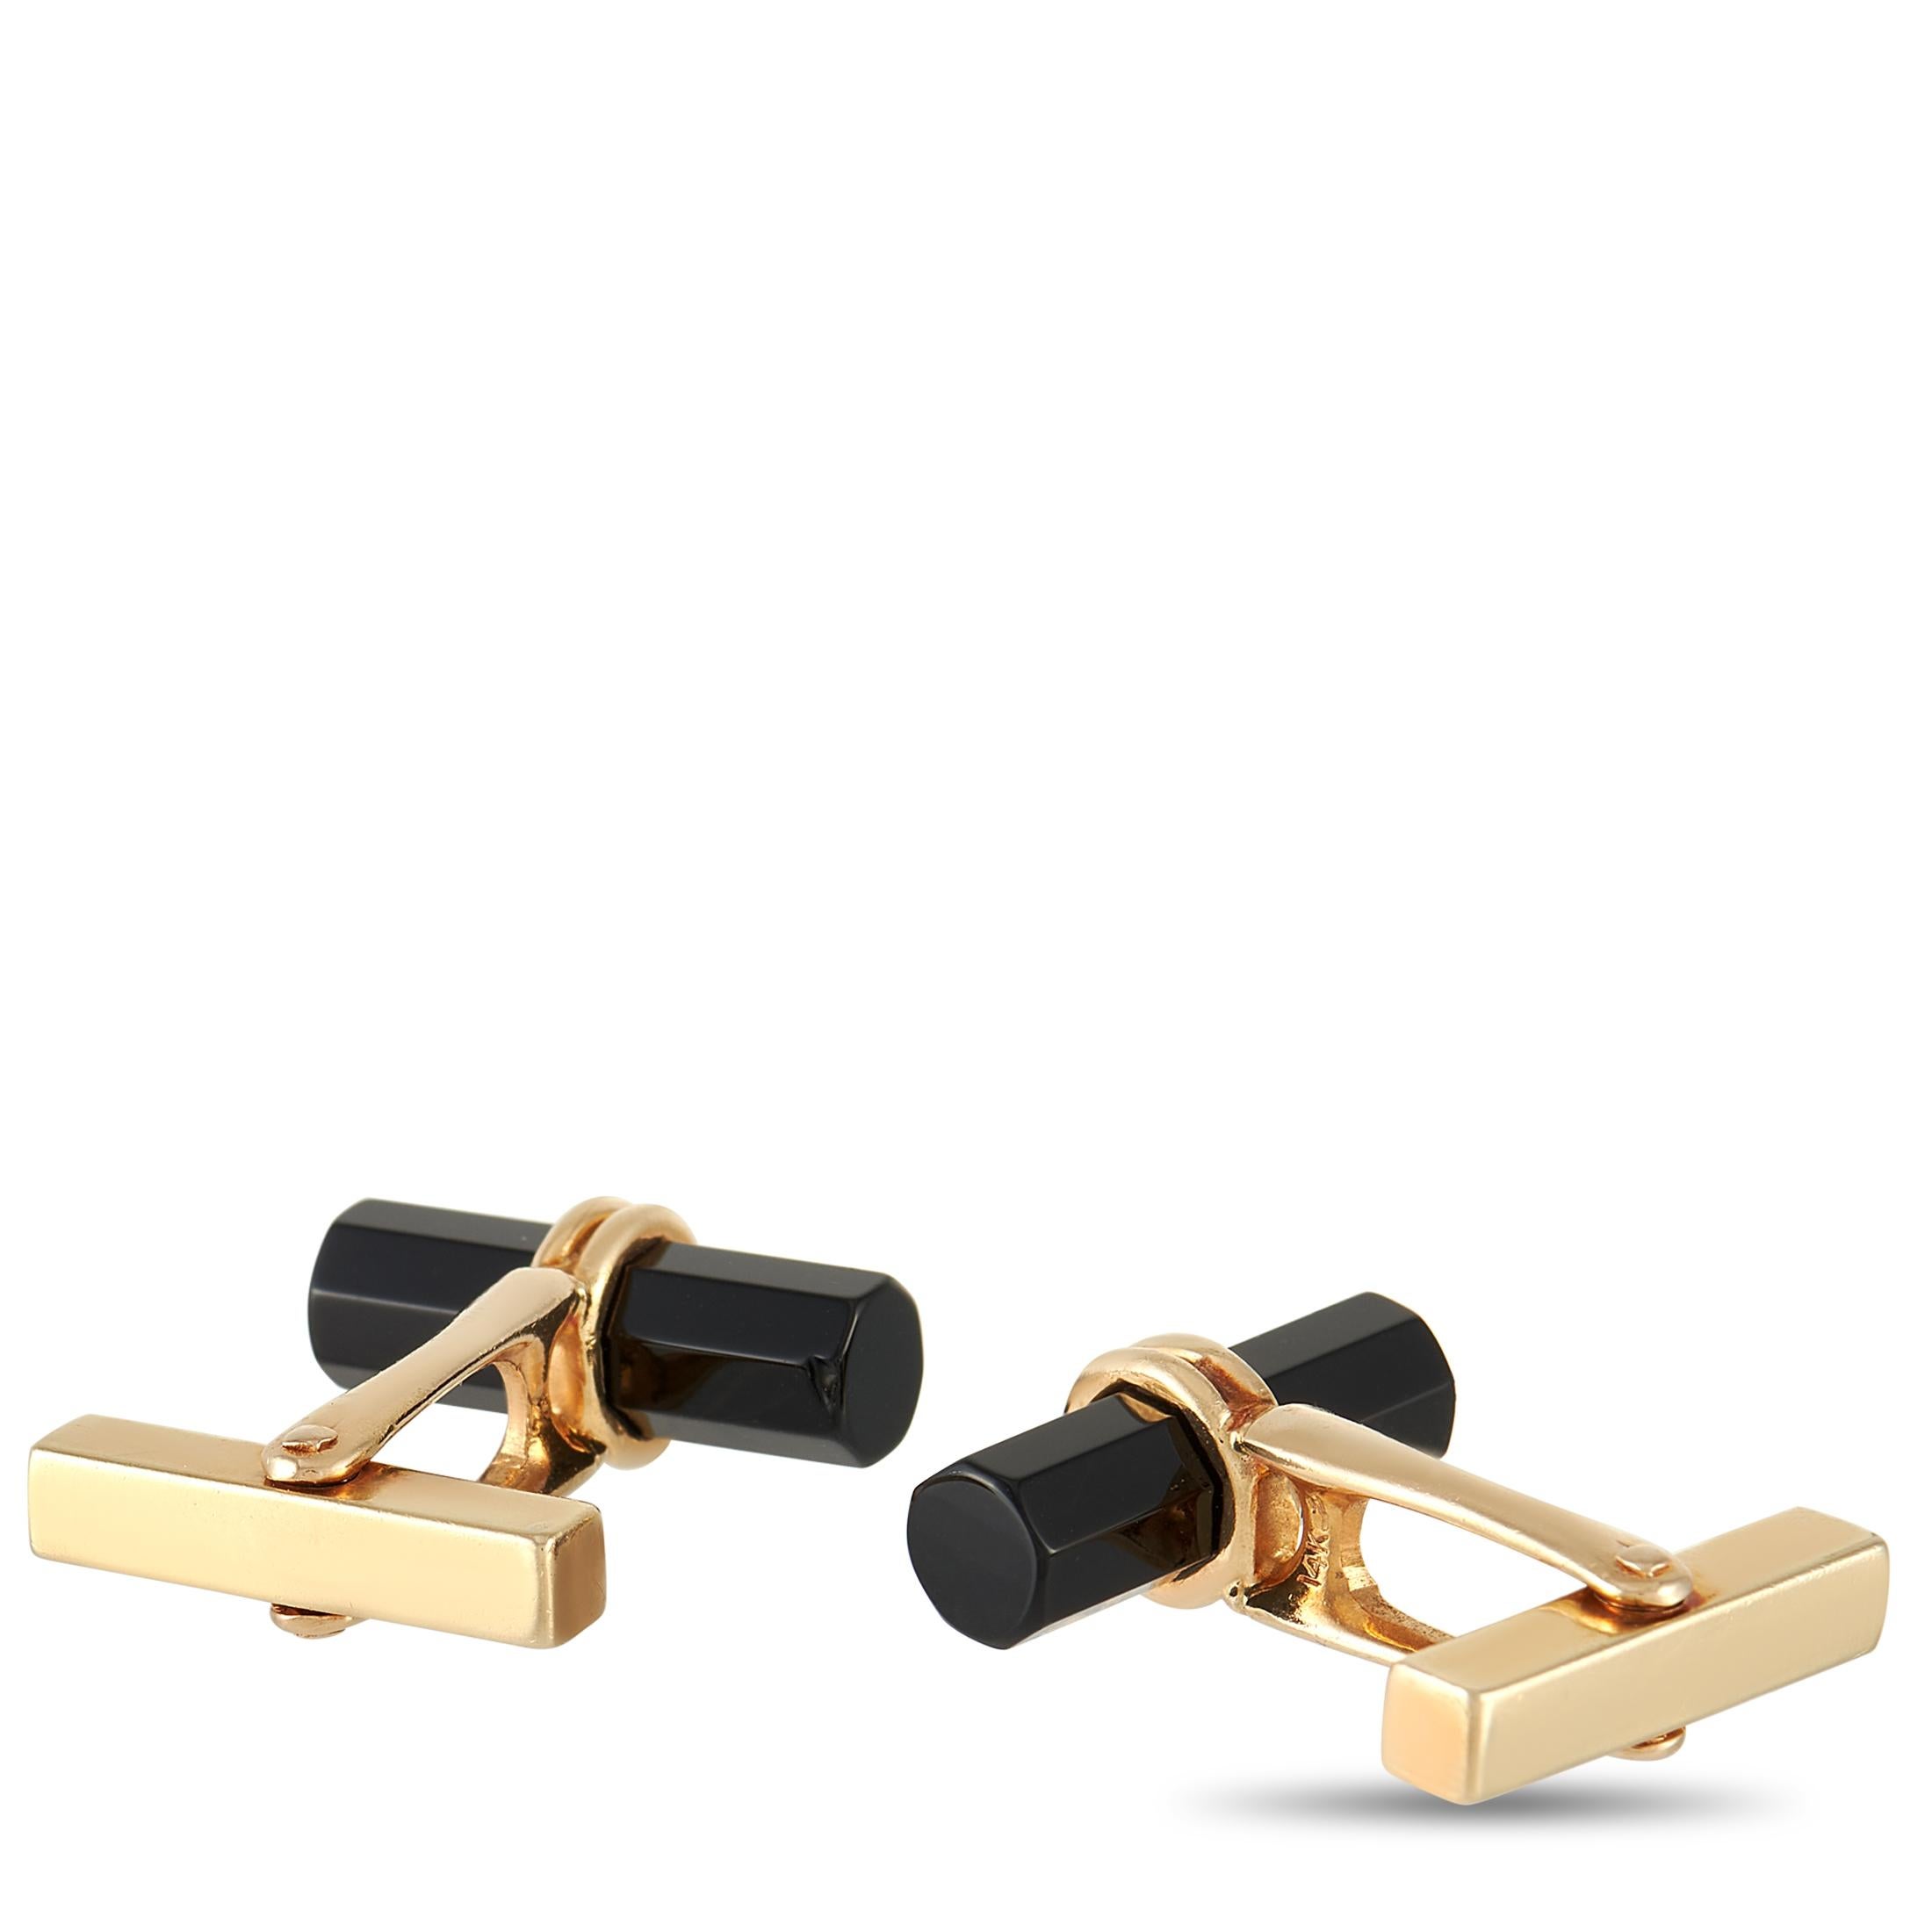 These luxury Tiffany & Co.cufflinks are poised to put the perfect finishing touch on any suited look. Crafted from lustrous 14K Yellow Gold, the onyx bar gives them a sleek sense of sophistication. Each cufflink measures .25” long and .75” wide -